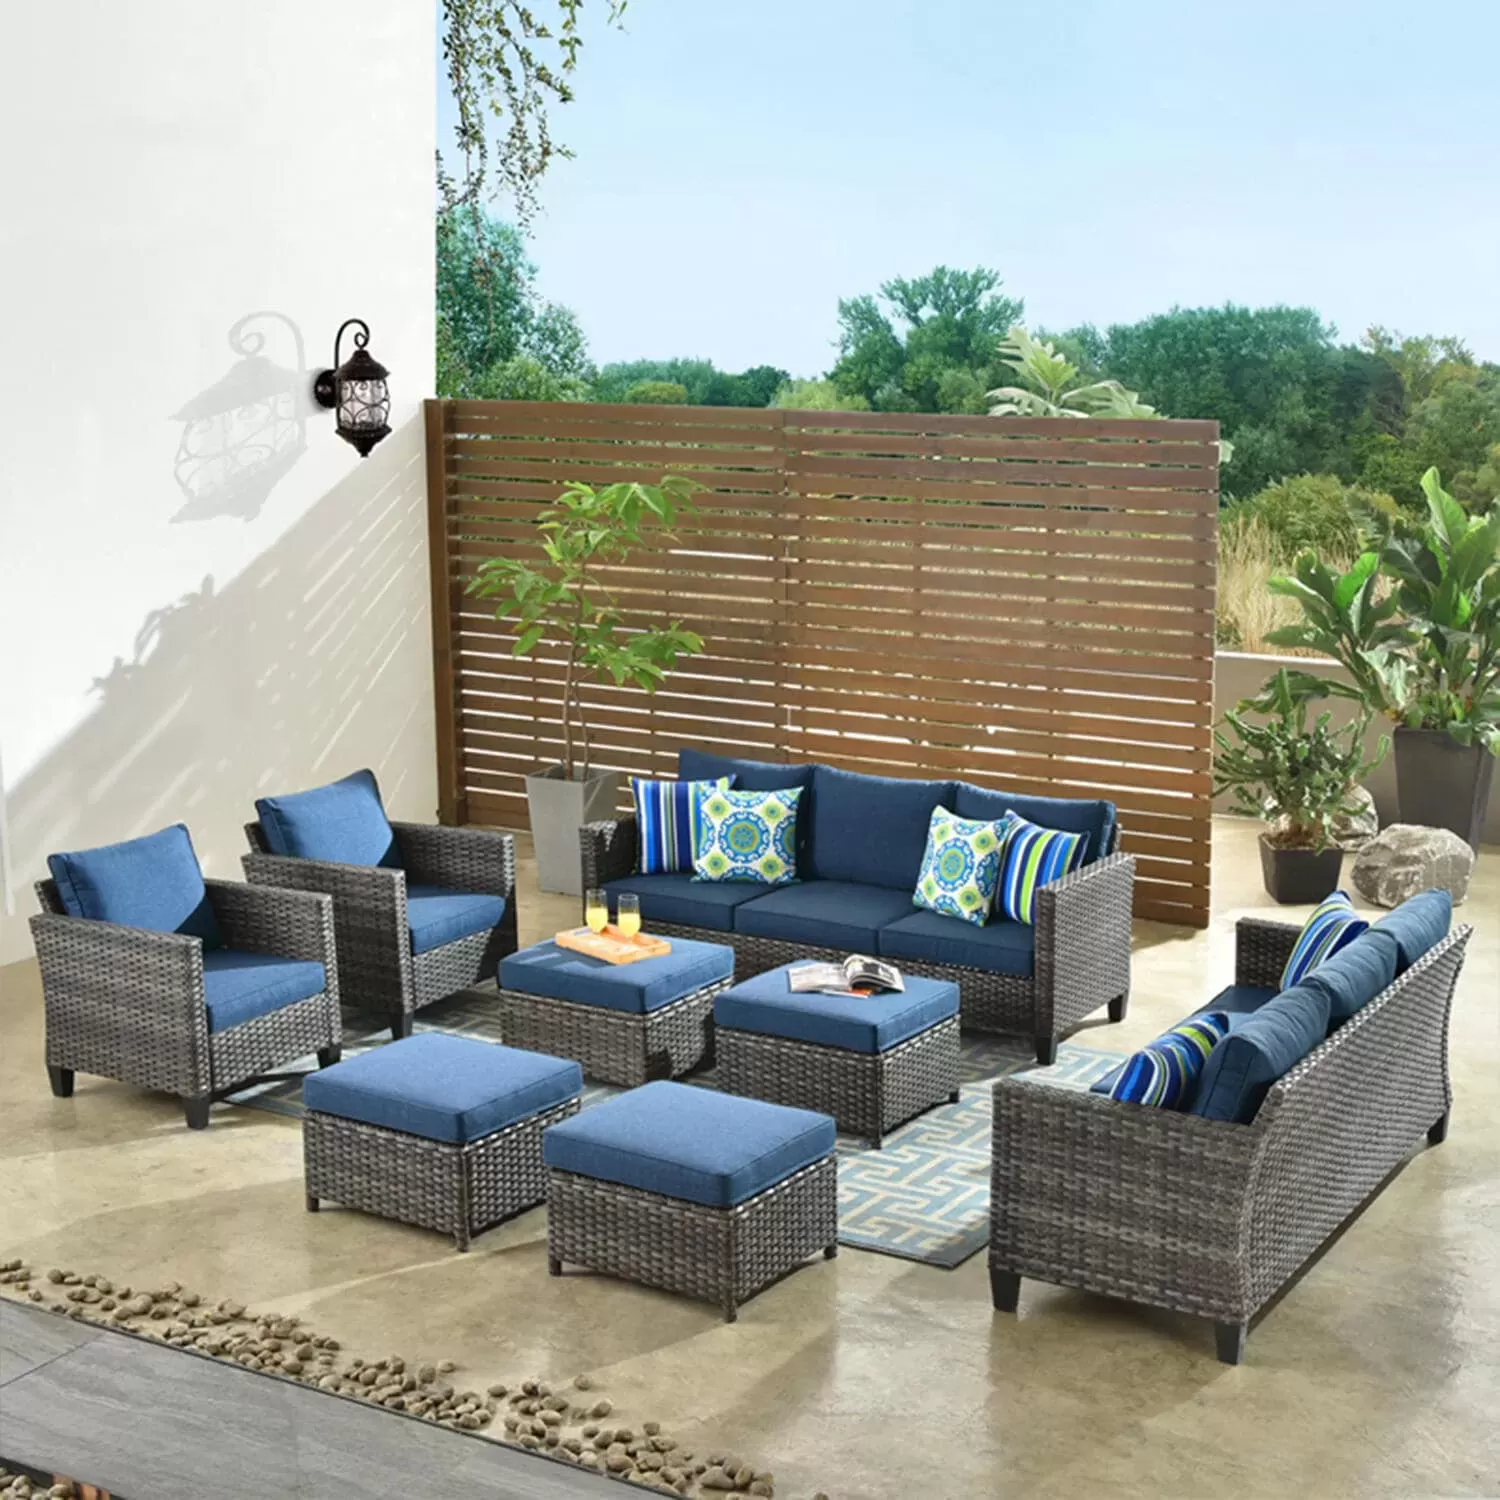 Patio Furniture 8 PCS Hight Back Outdoor Furniture Sets Modern Wicker Patio Furniture Conversation Sets with 4 Pillows All Weather Garden Patio Sofa